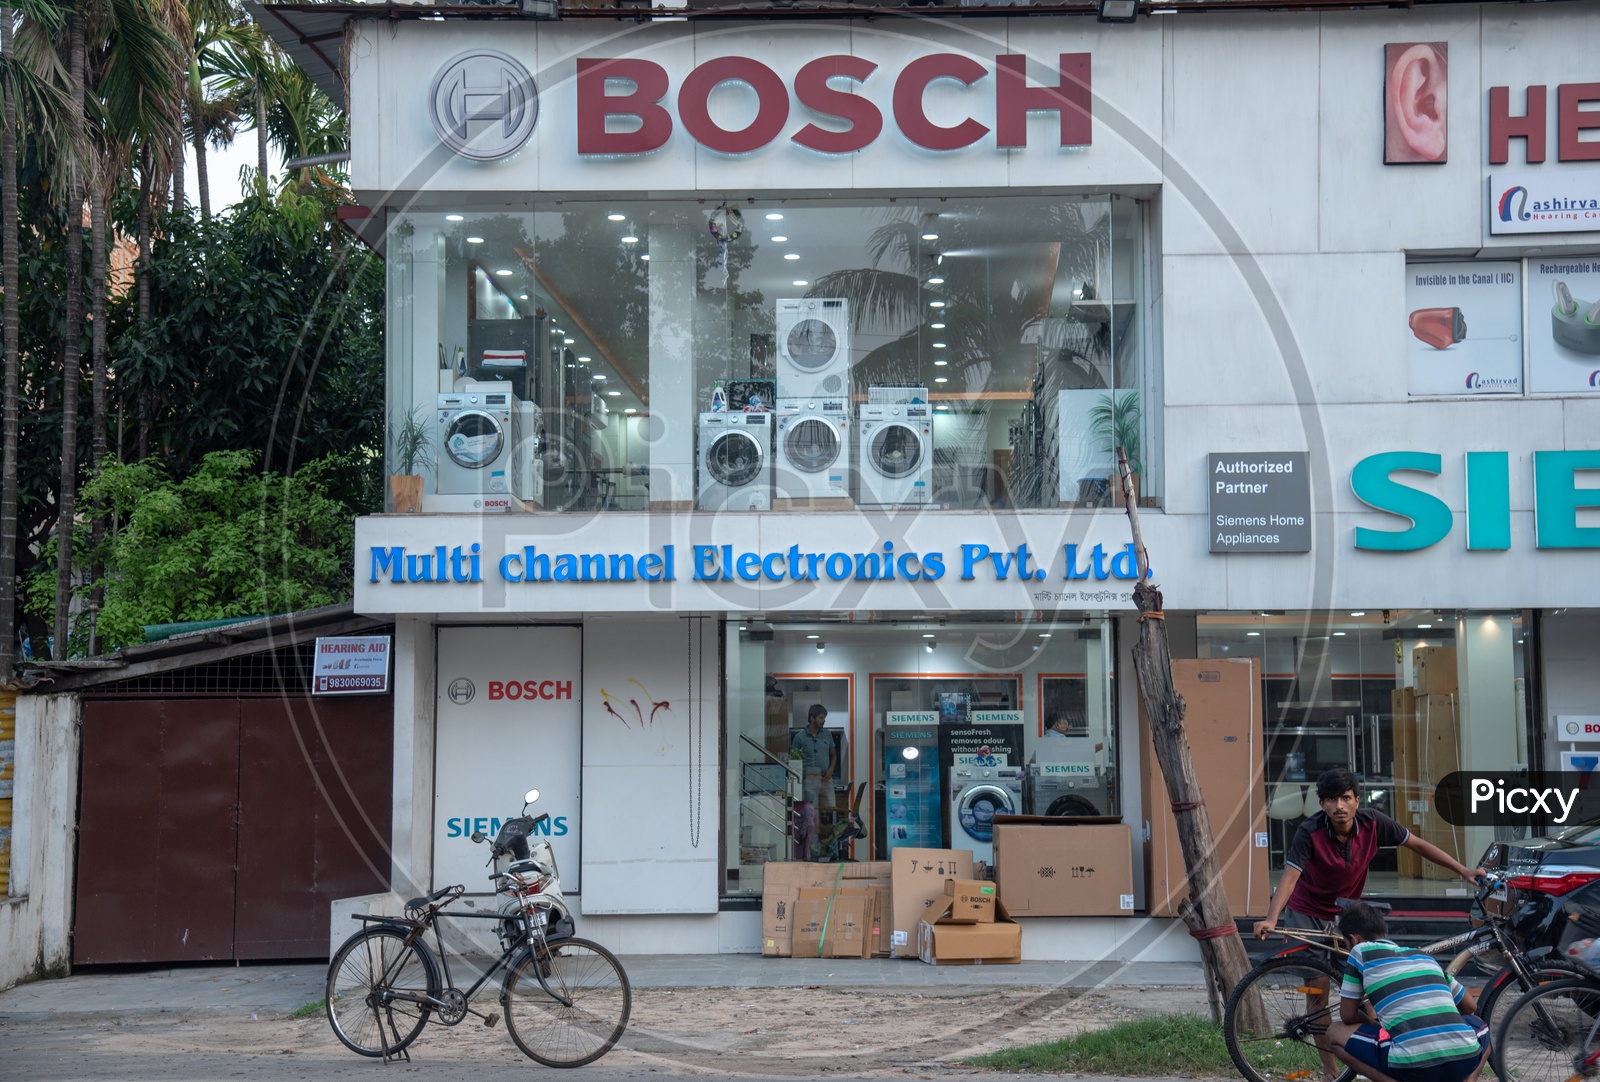 Bosch Name Board On a Outlet Shop